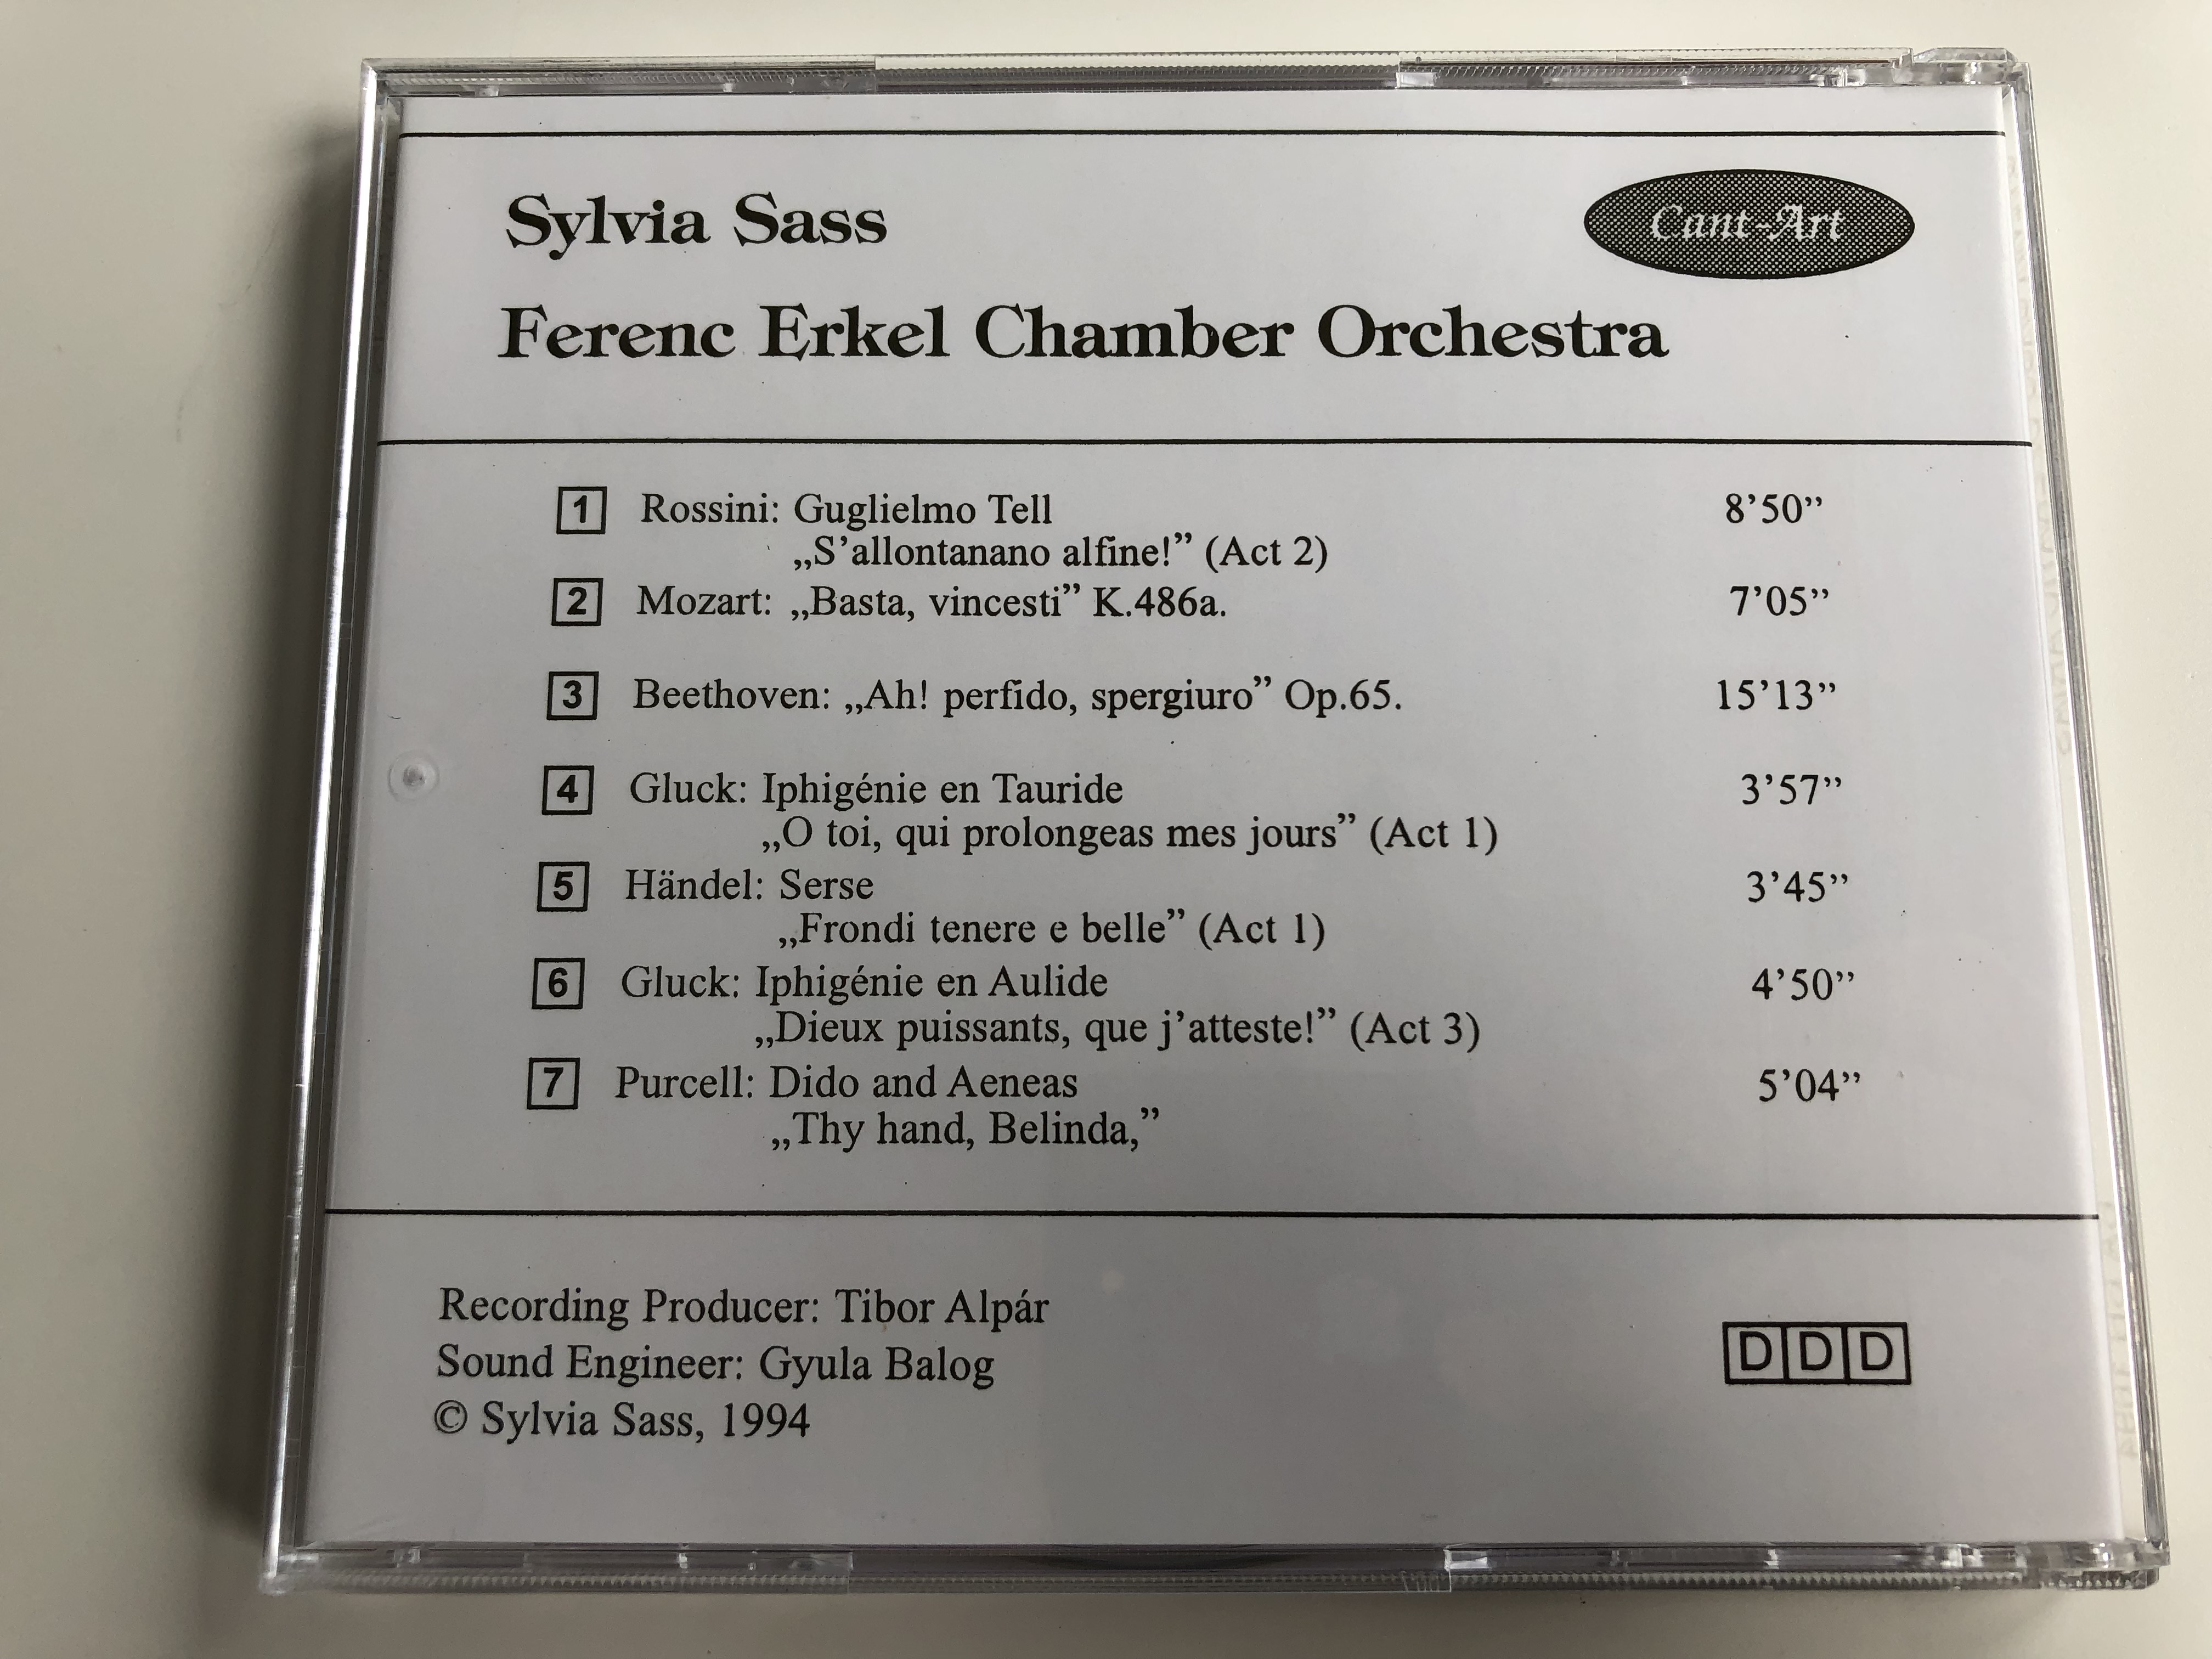 sylvia-sass-operatic-and-concert-arias-ferenc-erkel-chamber-orchestra-cant-art-audio-cd-1994-ca-cd-1094-9-.jpg